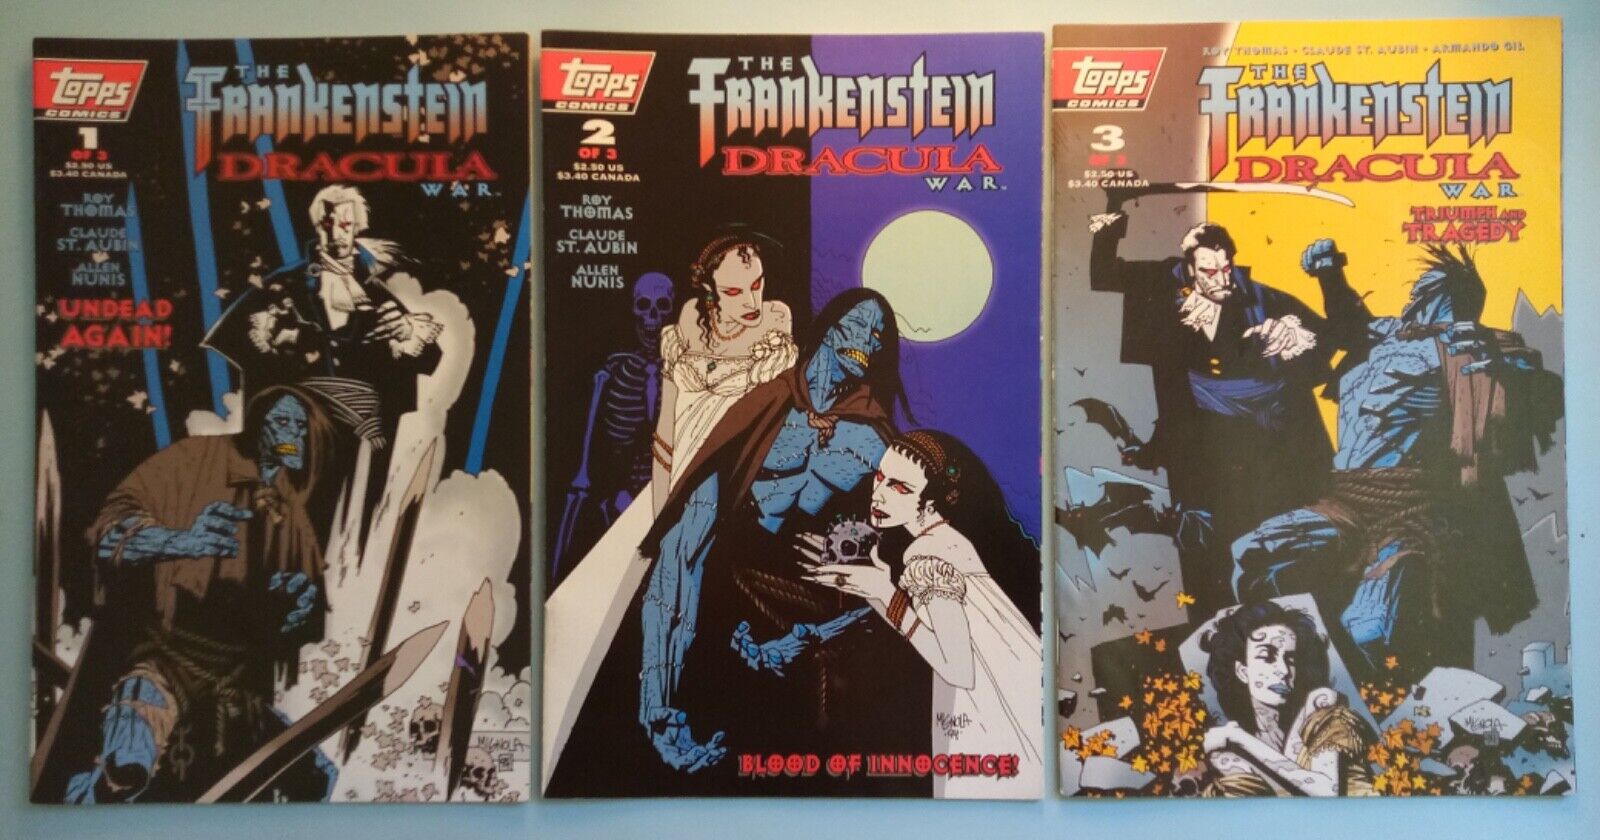 The Frankenstein Dracula War #1-3 Complete Set Topps Comics 1995 Mint Condition